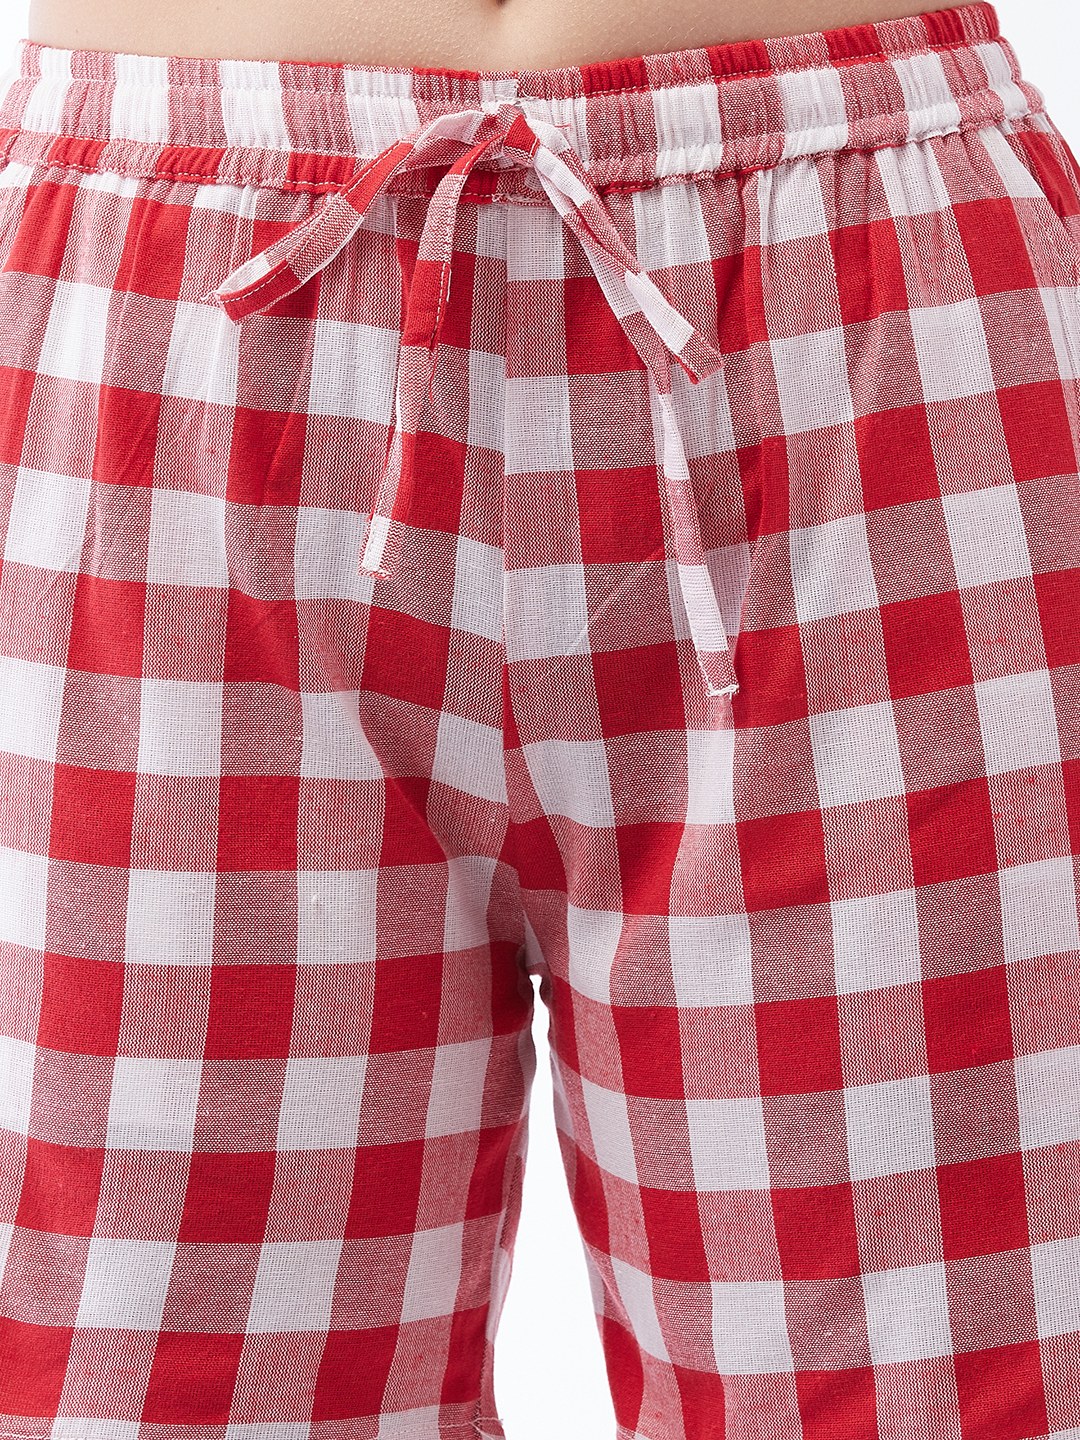 Red & White Check Shorts For Teens